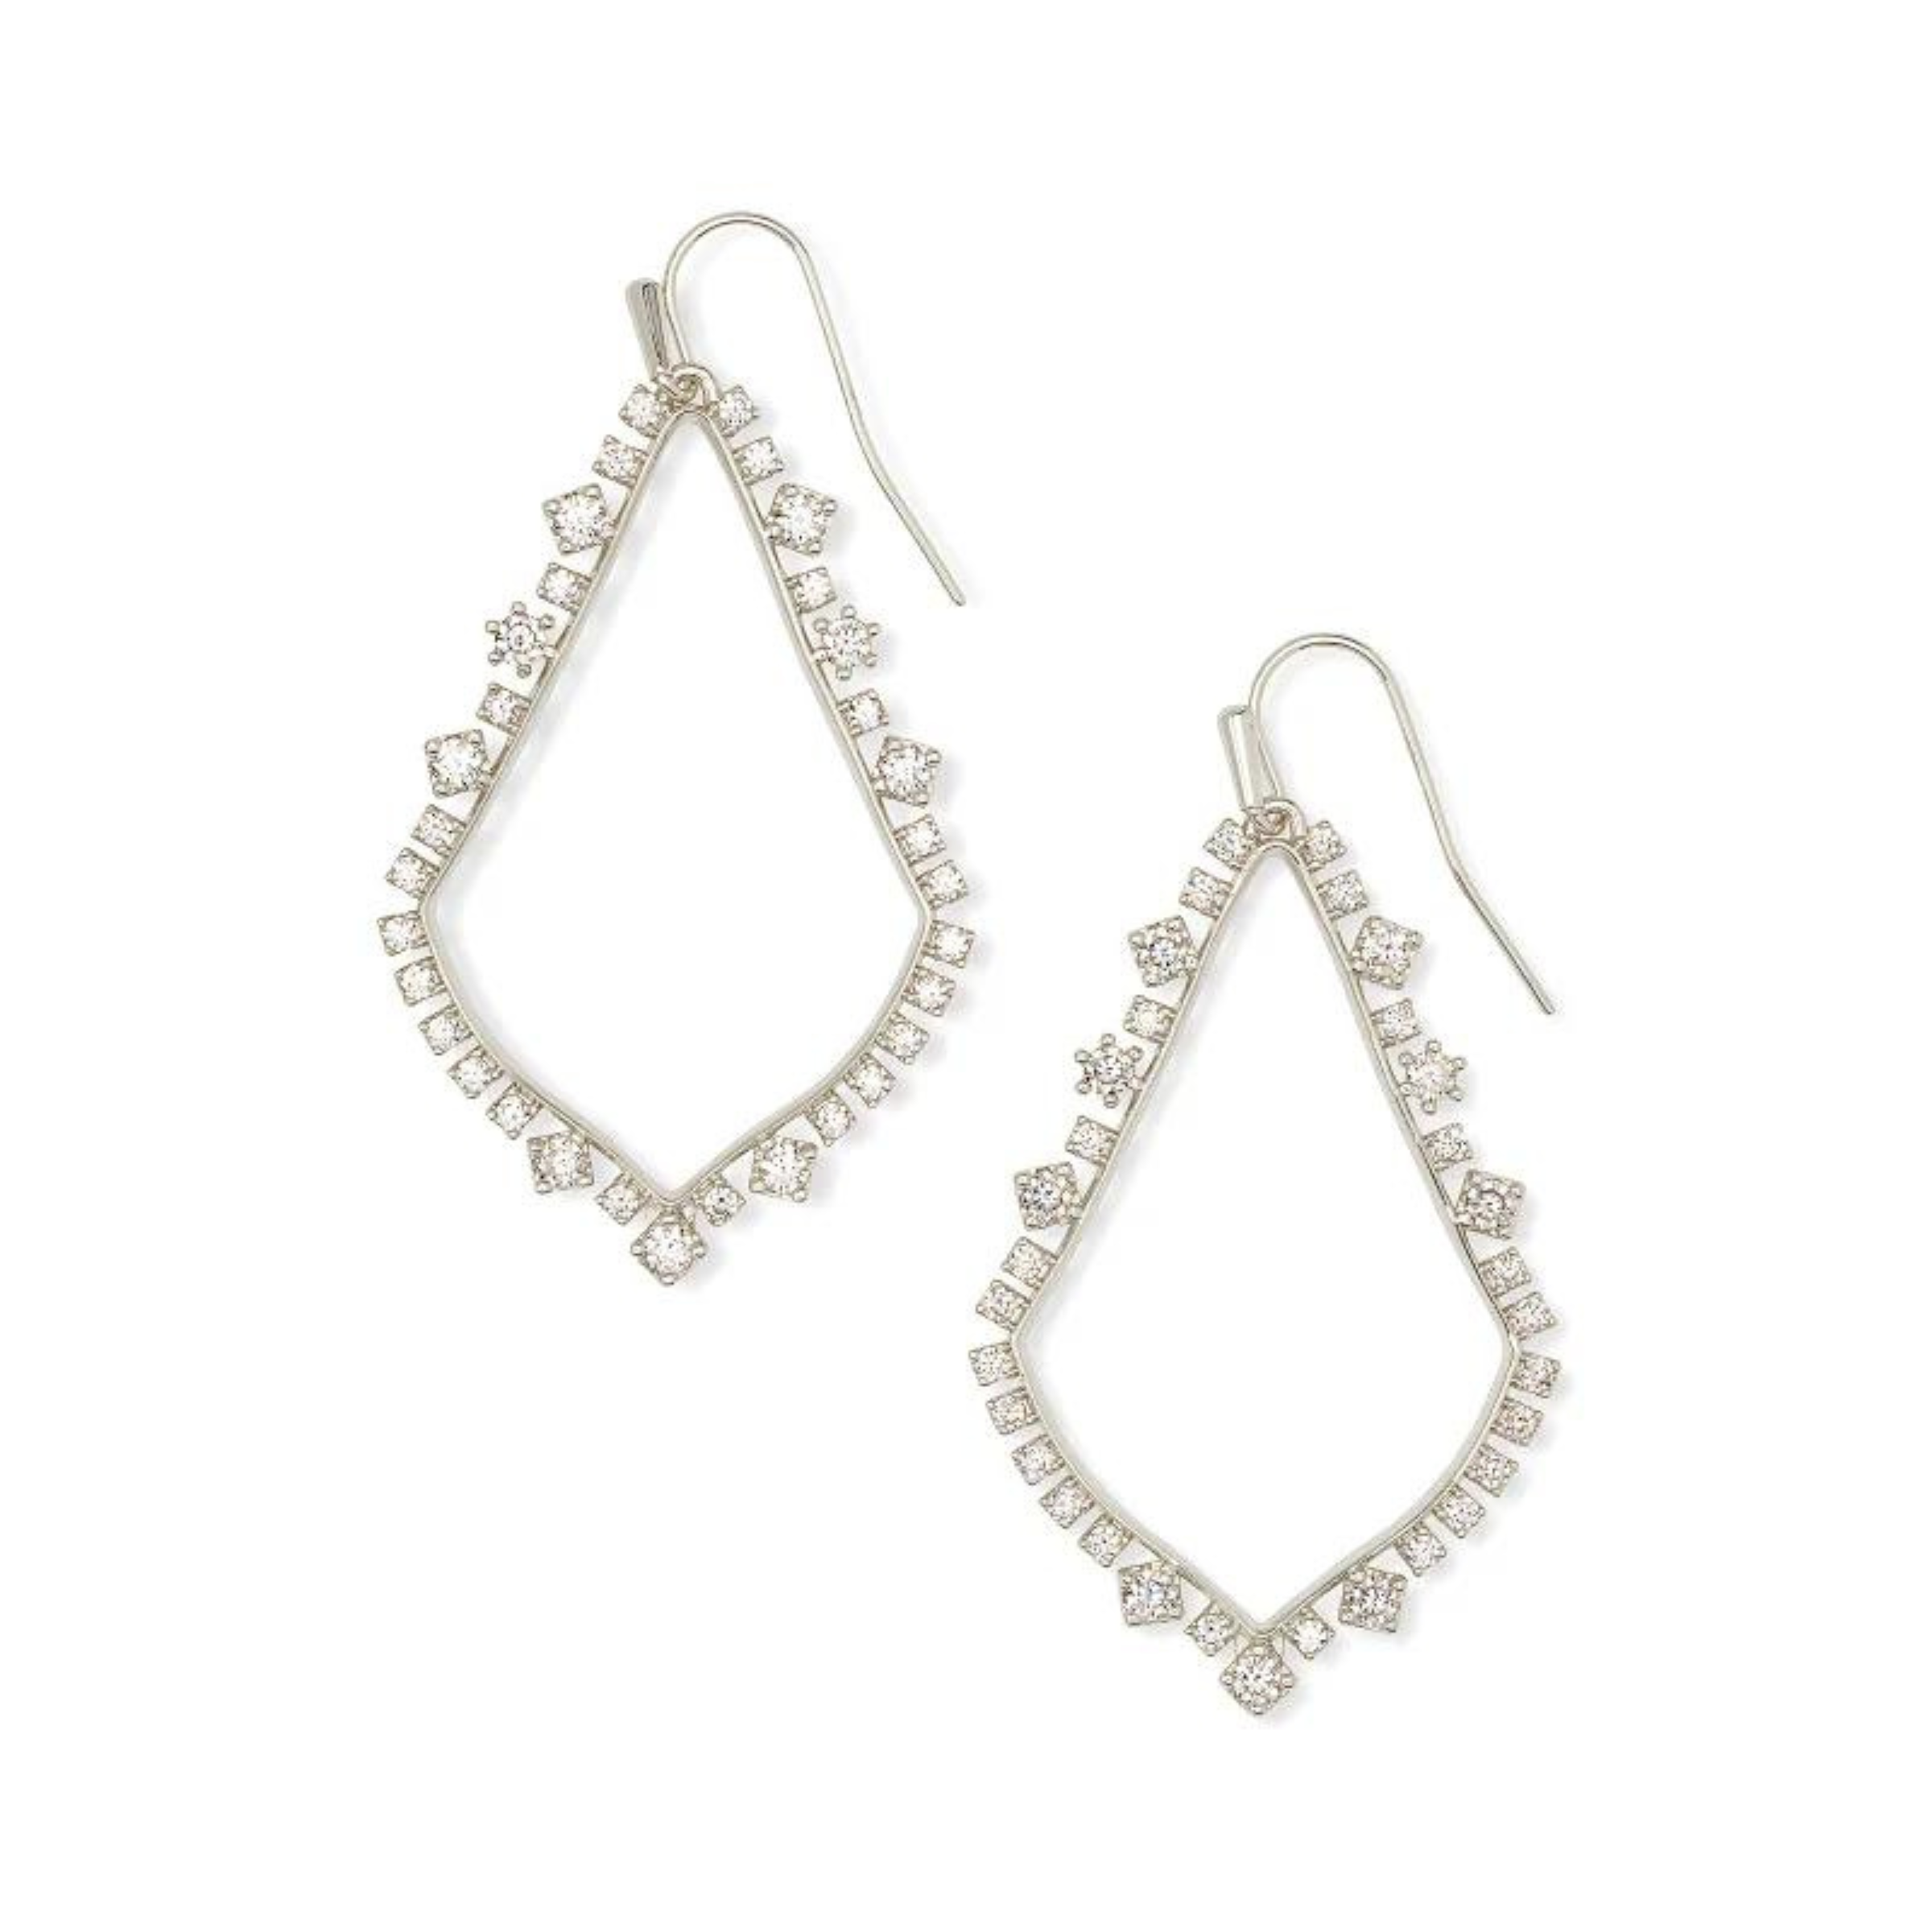 Silver crystal drop earrings, pictured on a white background.